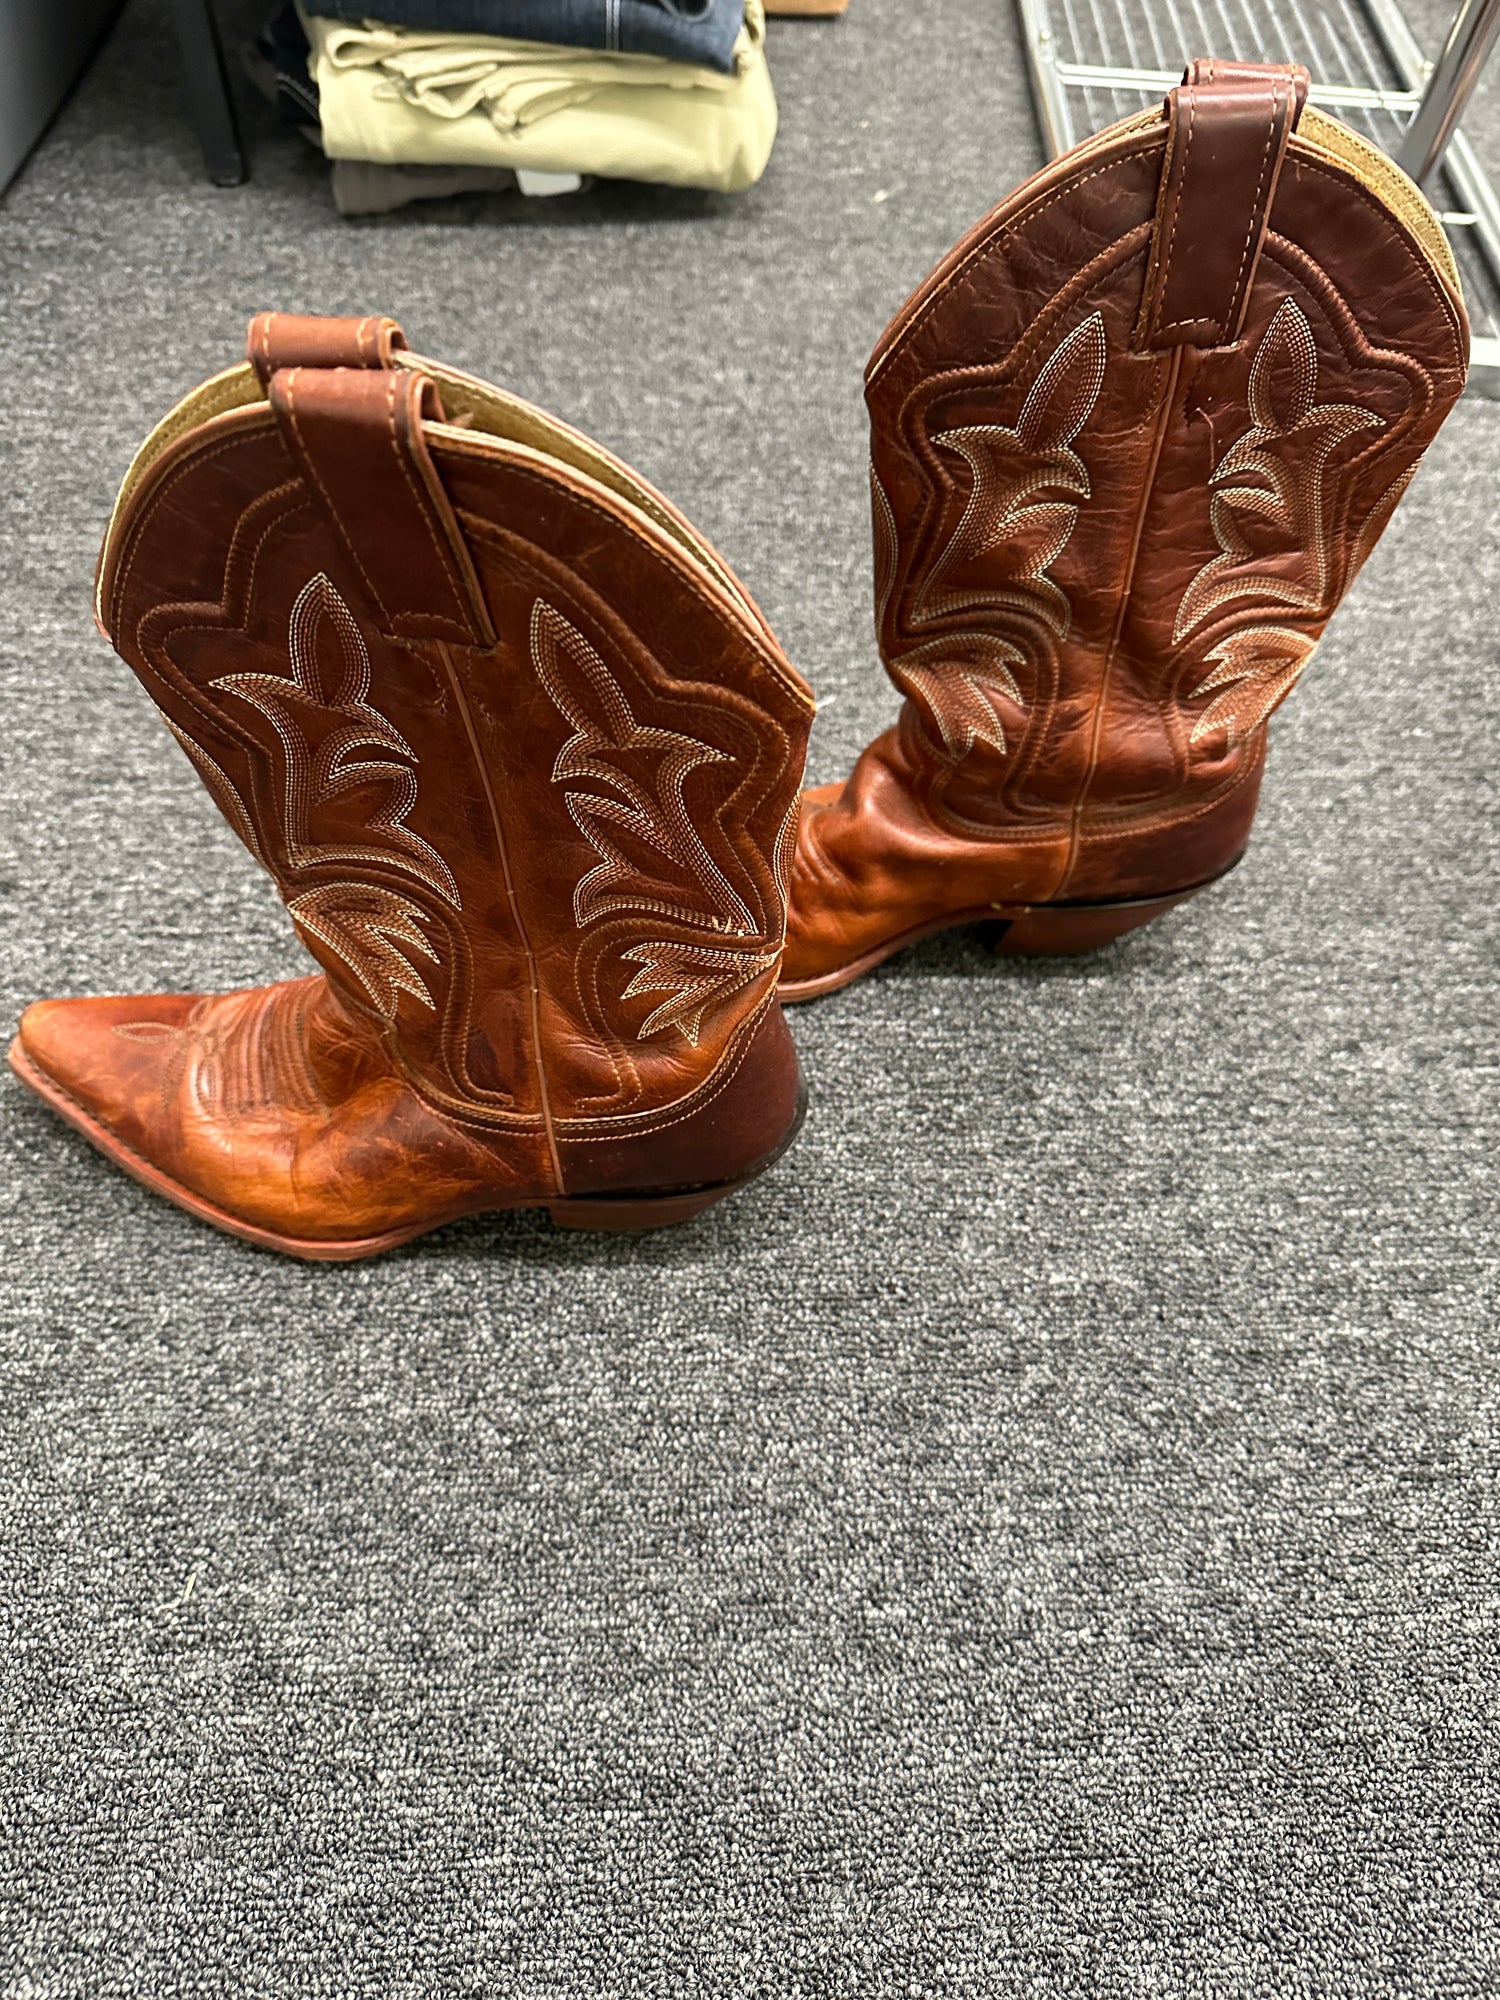 Women's Cowgirl Boots Red/Brown Size 7.5